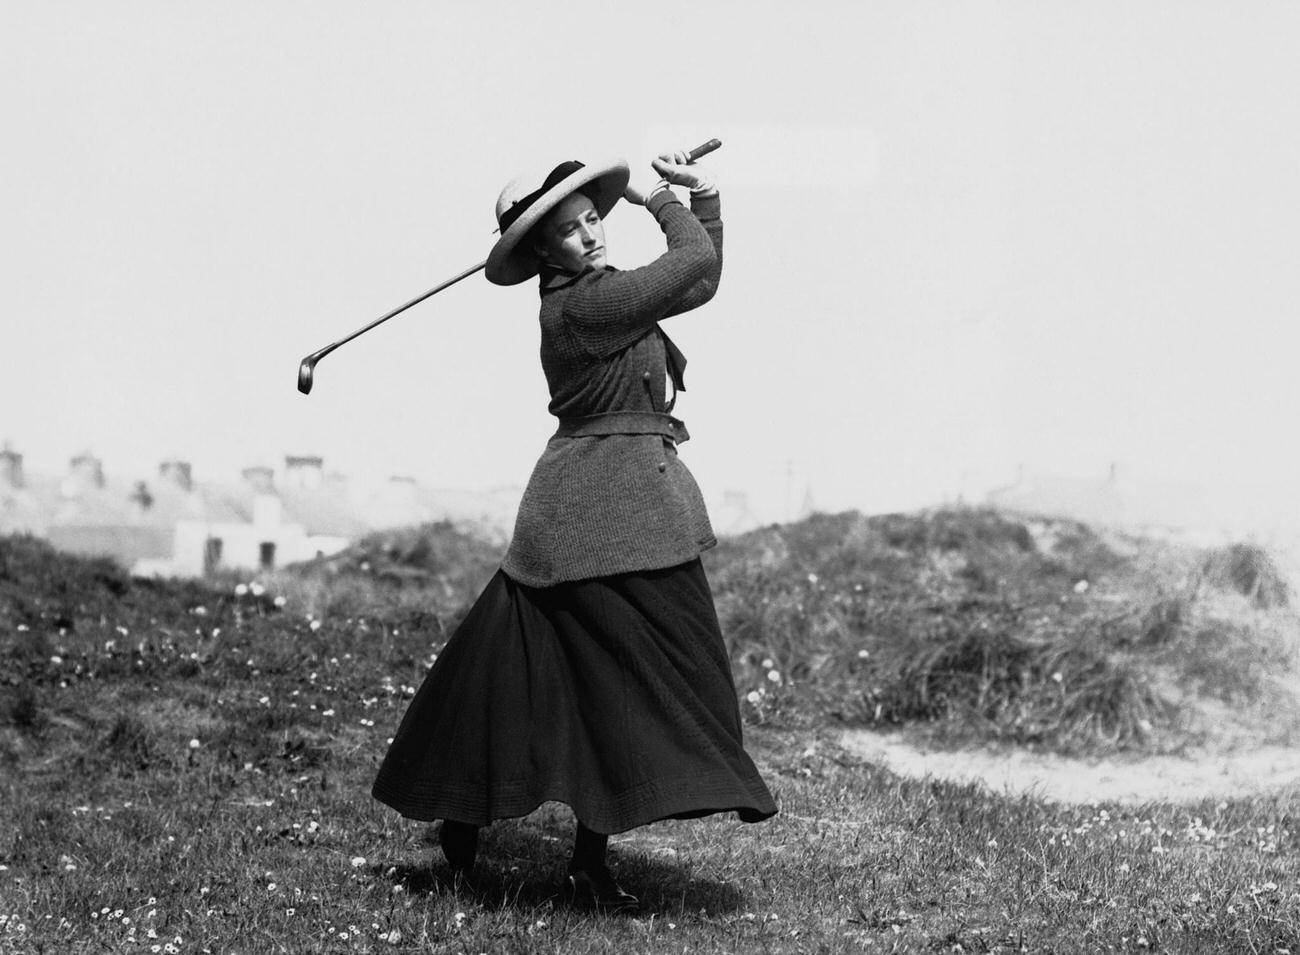 Miss Boyd teeing off at Portrush golf course.